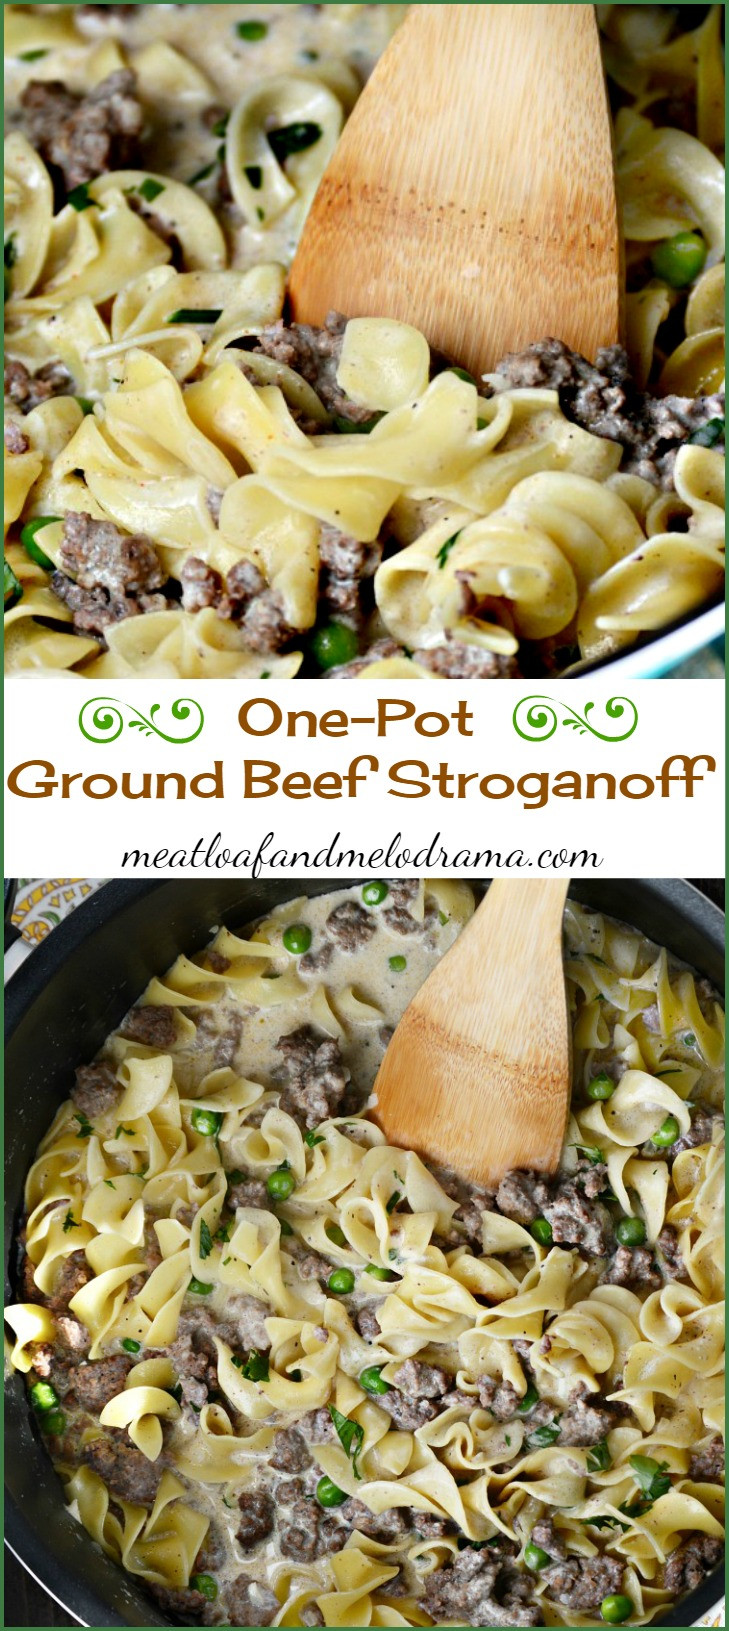 One Pot Meals With Ground Beef
 e Pot Ground Beef Stroganoff Meatloaf and Melodrama